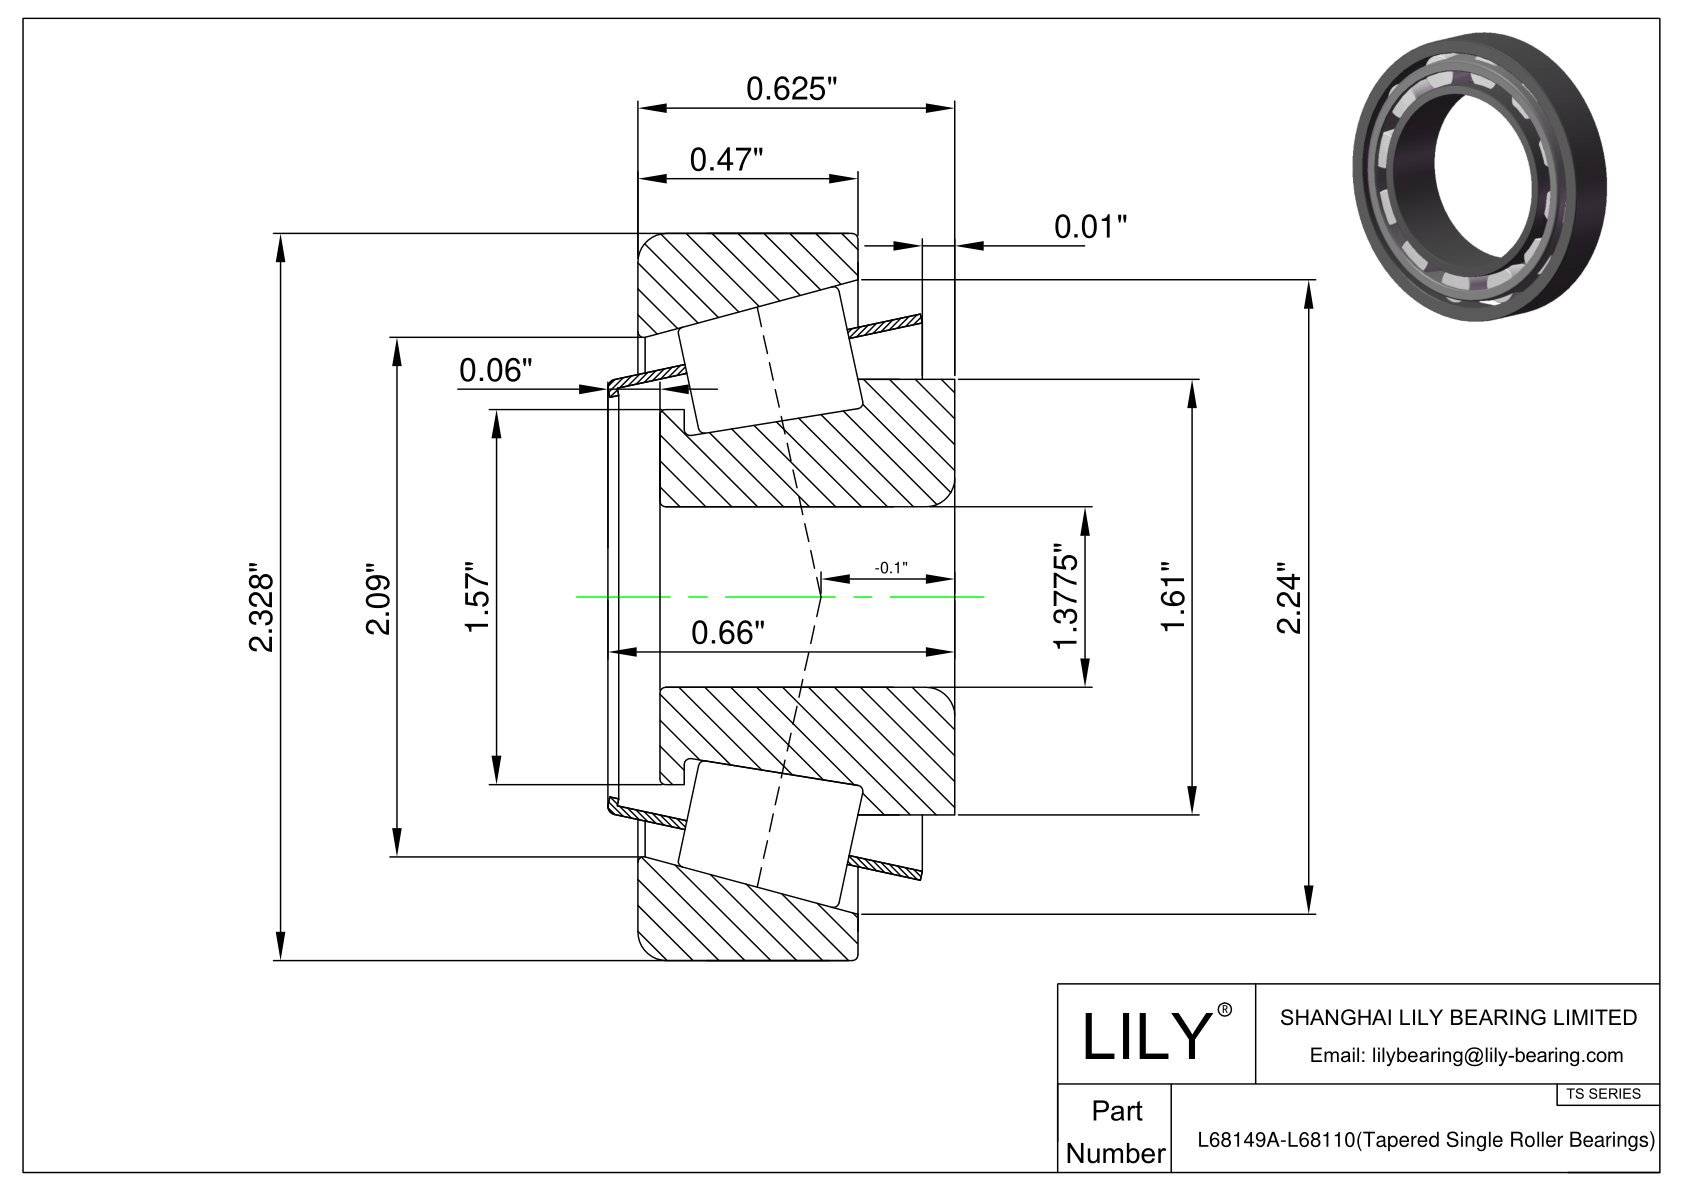 L68149A-L68110 TS (Tapered Single Roller Bearings) (Imperial) cad drawing